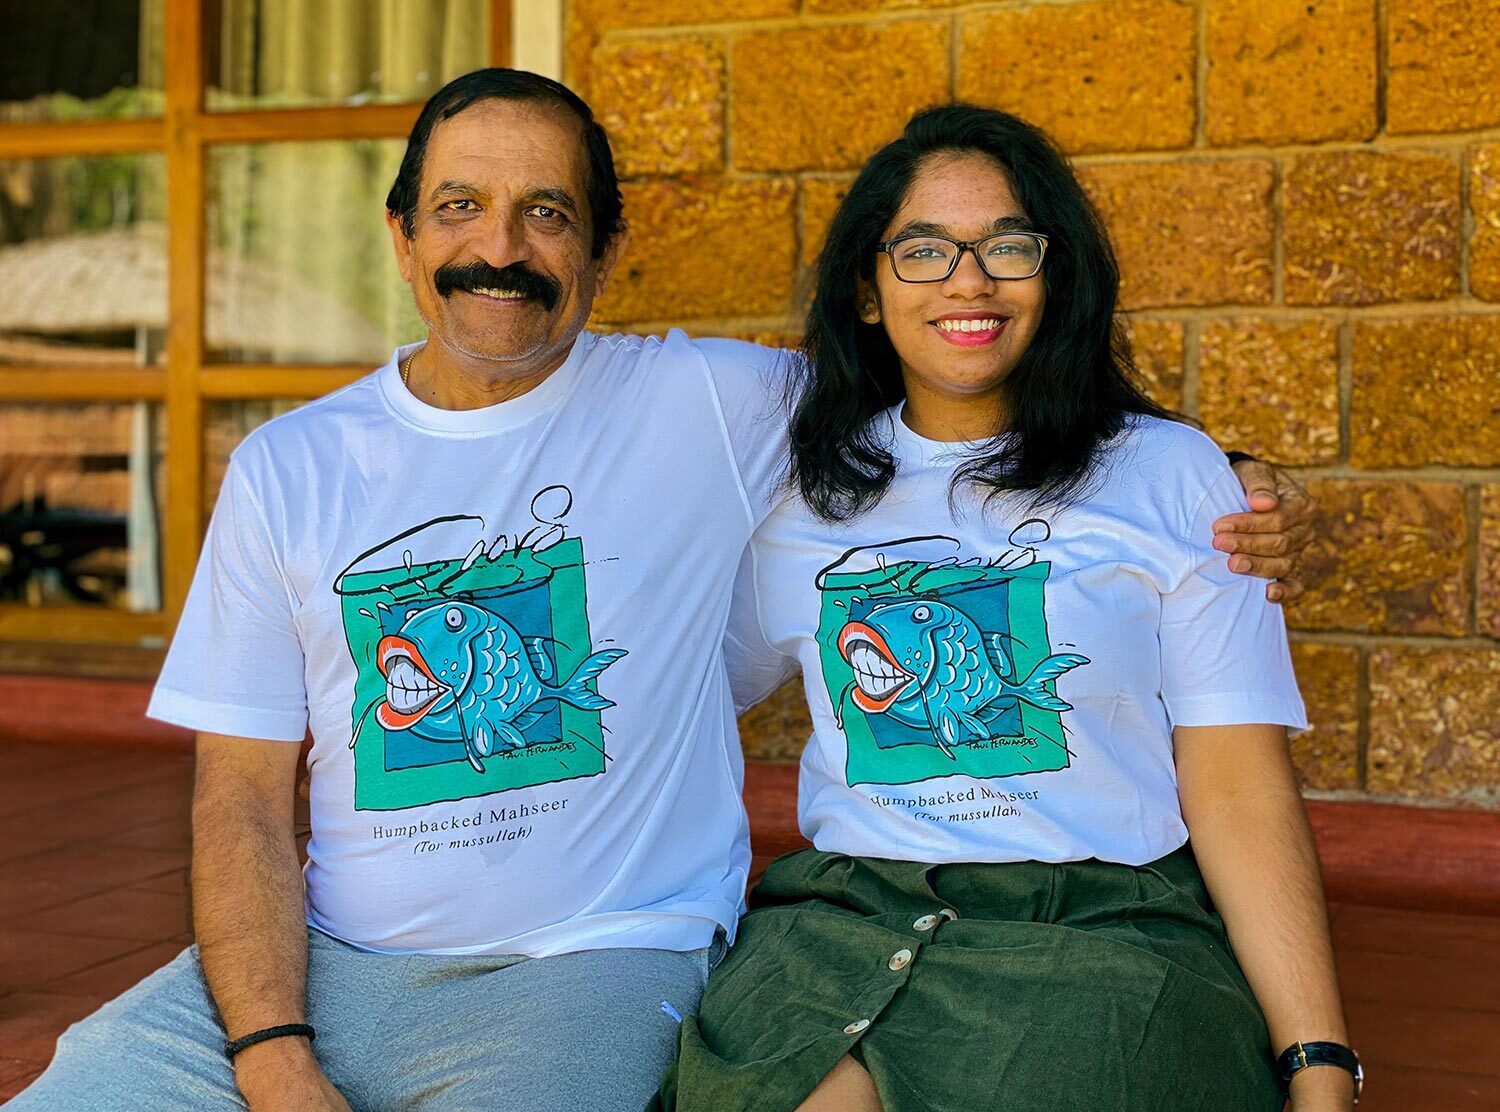 Evolve Back, Coorg Appa and I proudly repping our matching Evolve Back T-shirts acquired at Haystack, the gift shop